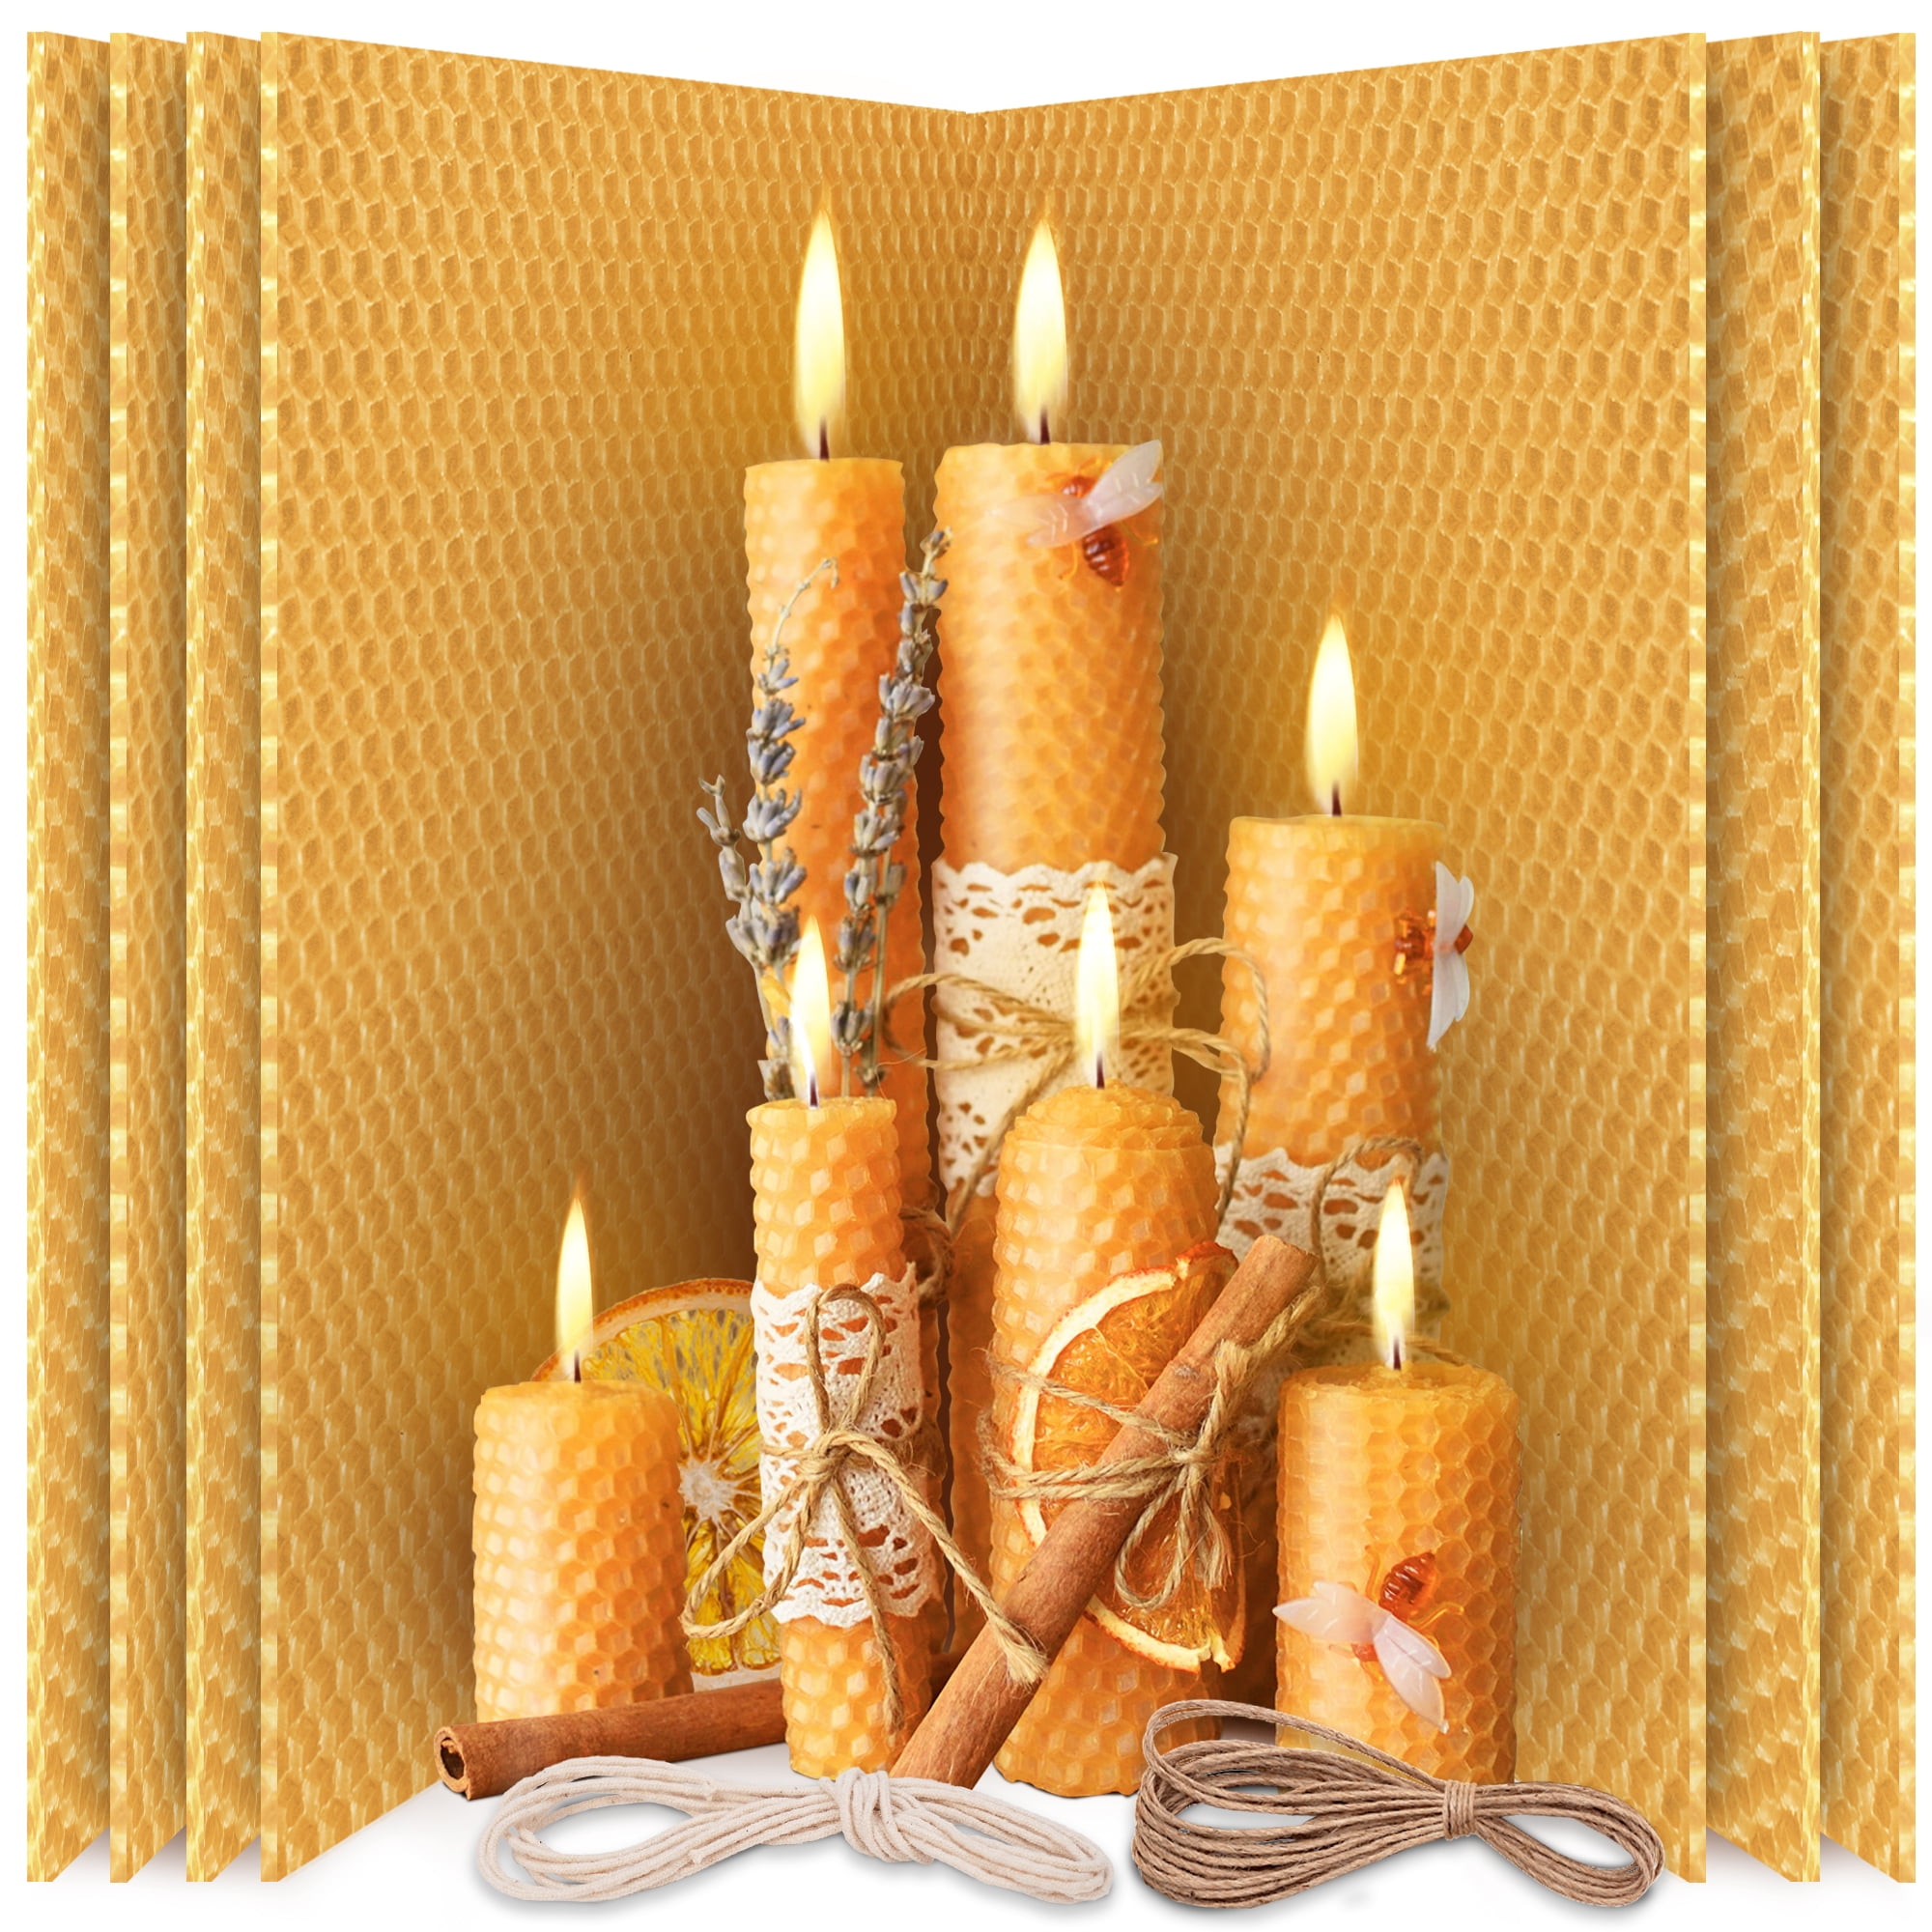 Easy DIY Candle Making Kits for Adults Kids 6 Sets 20cm x 20cm Natural Wax Rolling Sheets with Wicks 100% Pure Beeswax Sheets for Candle Making 6pcs Orange